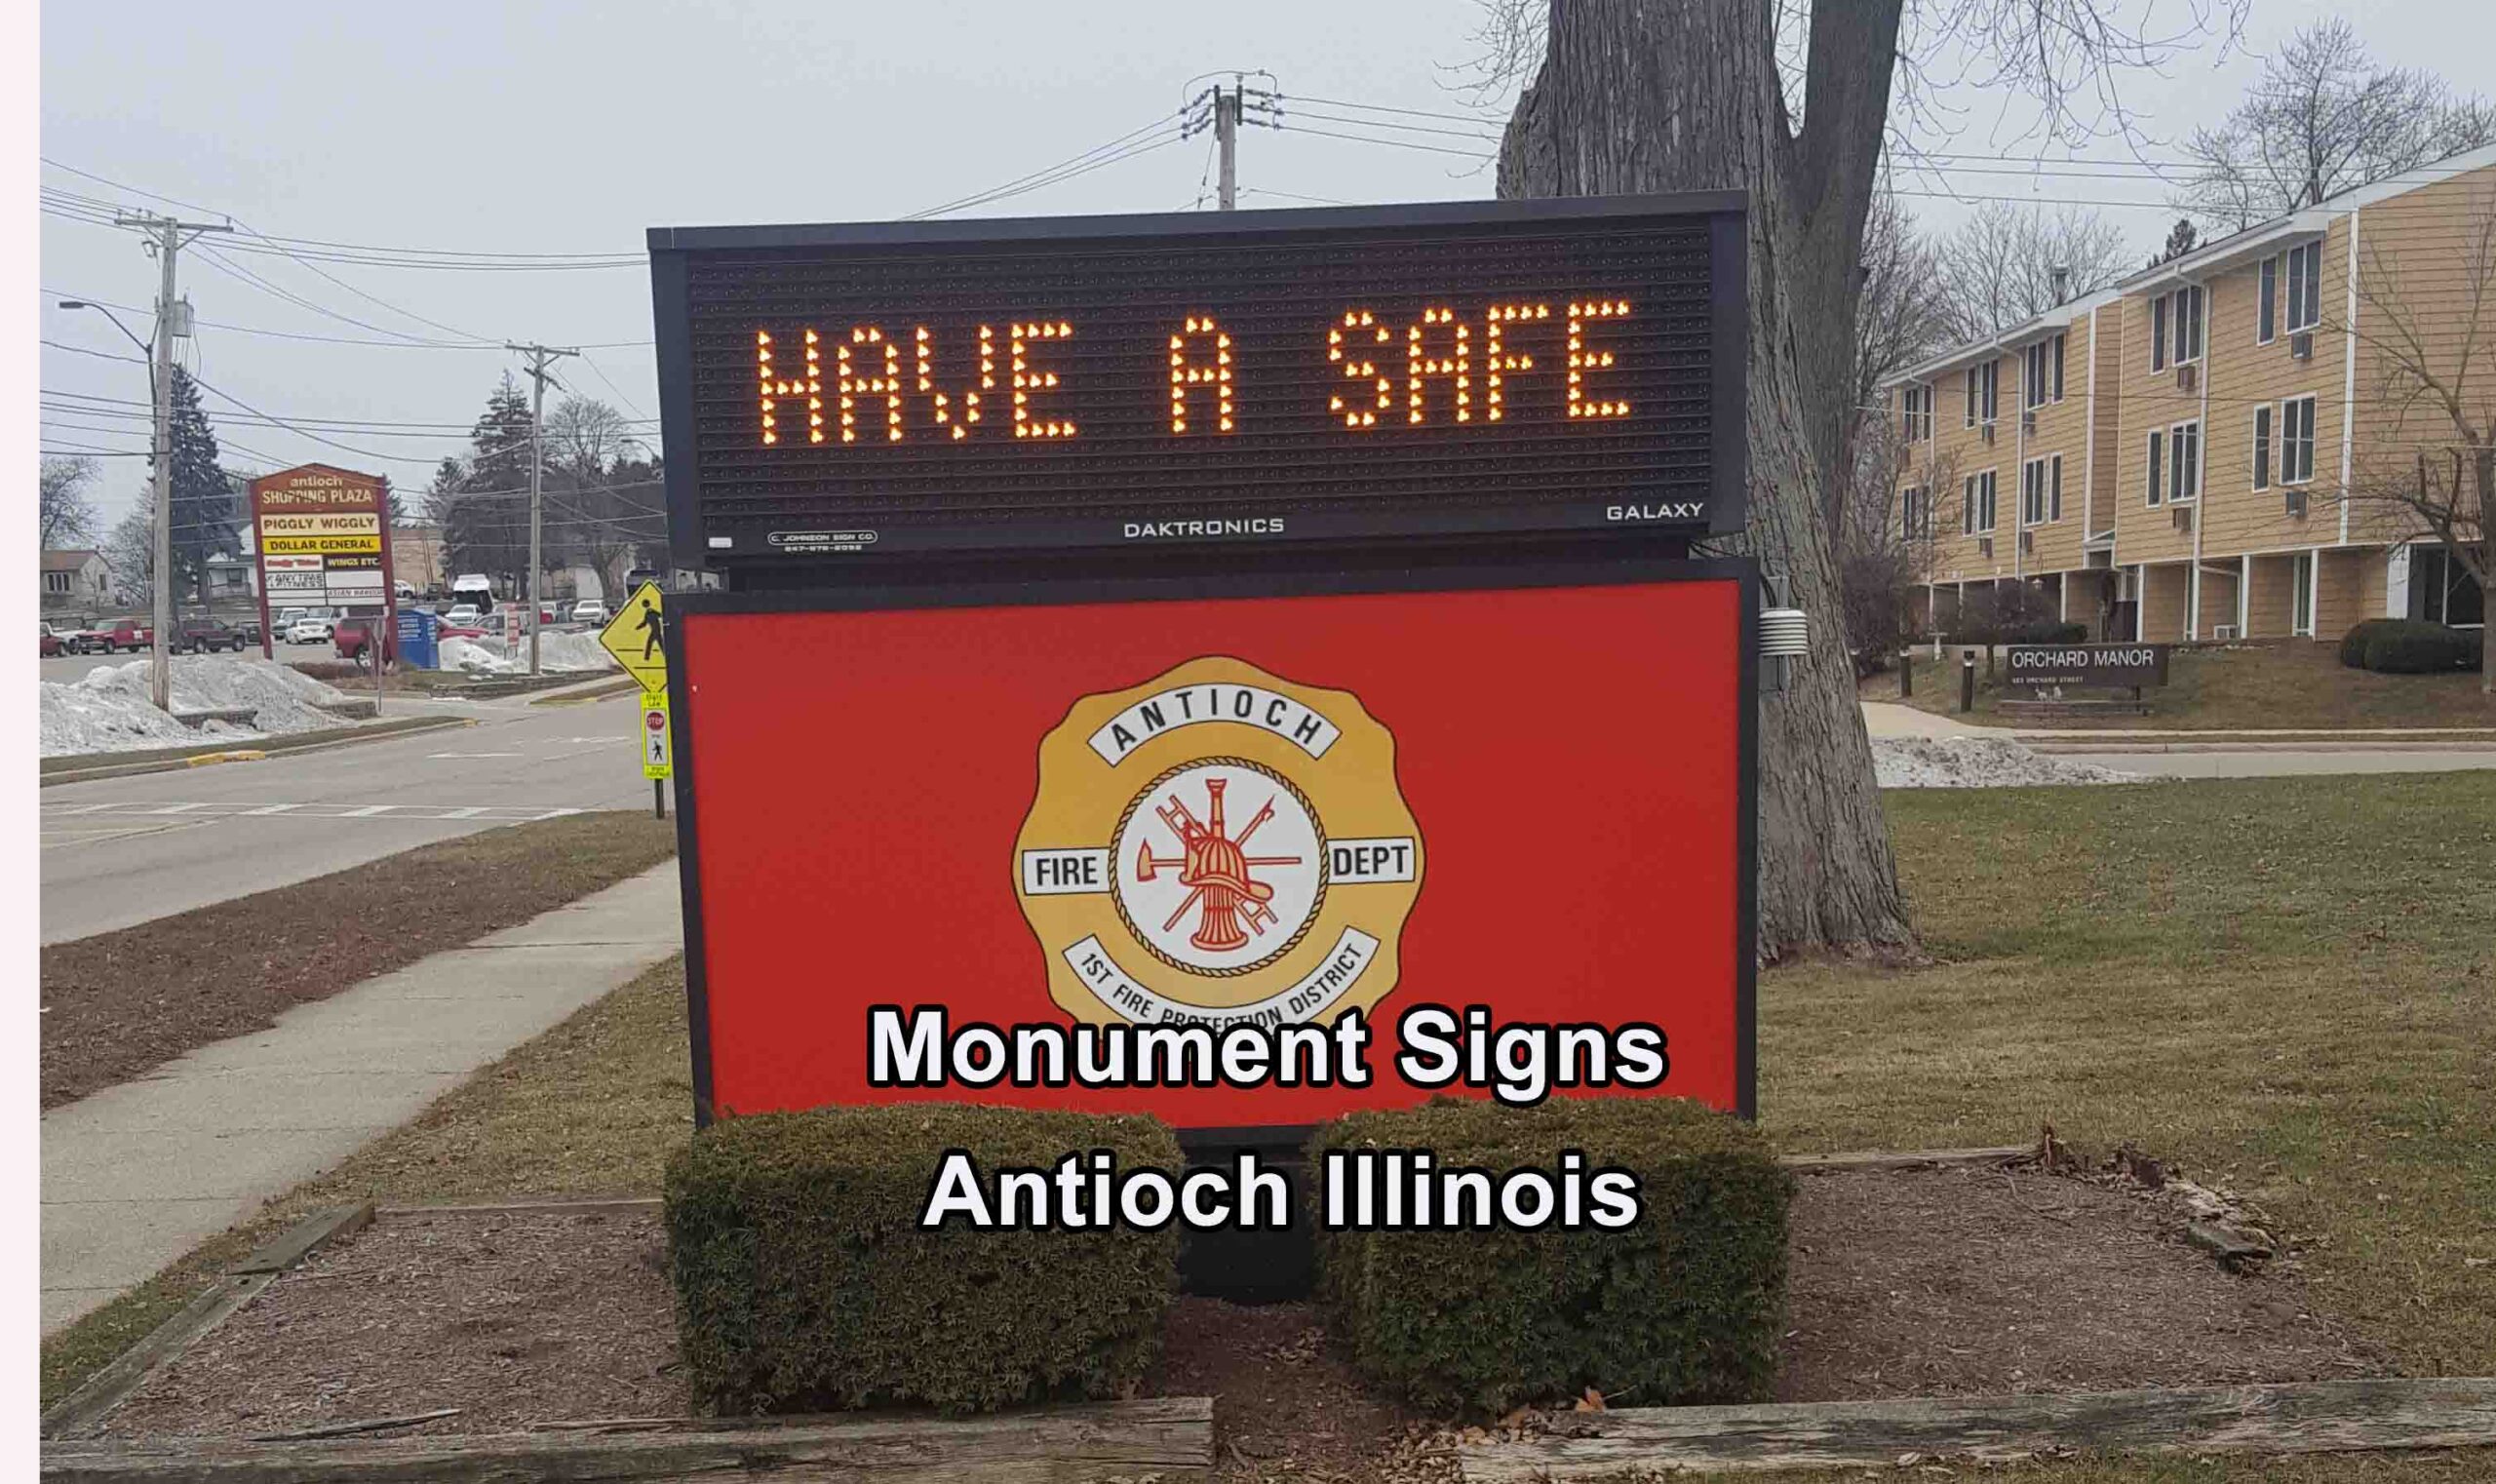 Monument Signs in Antioch Illinois - Reader Board 2